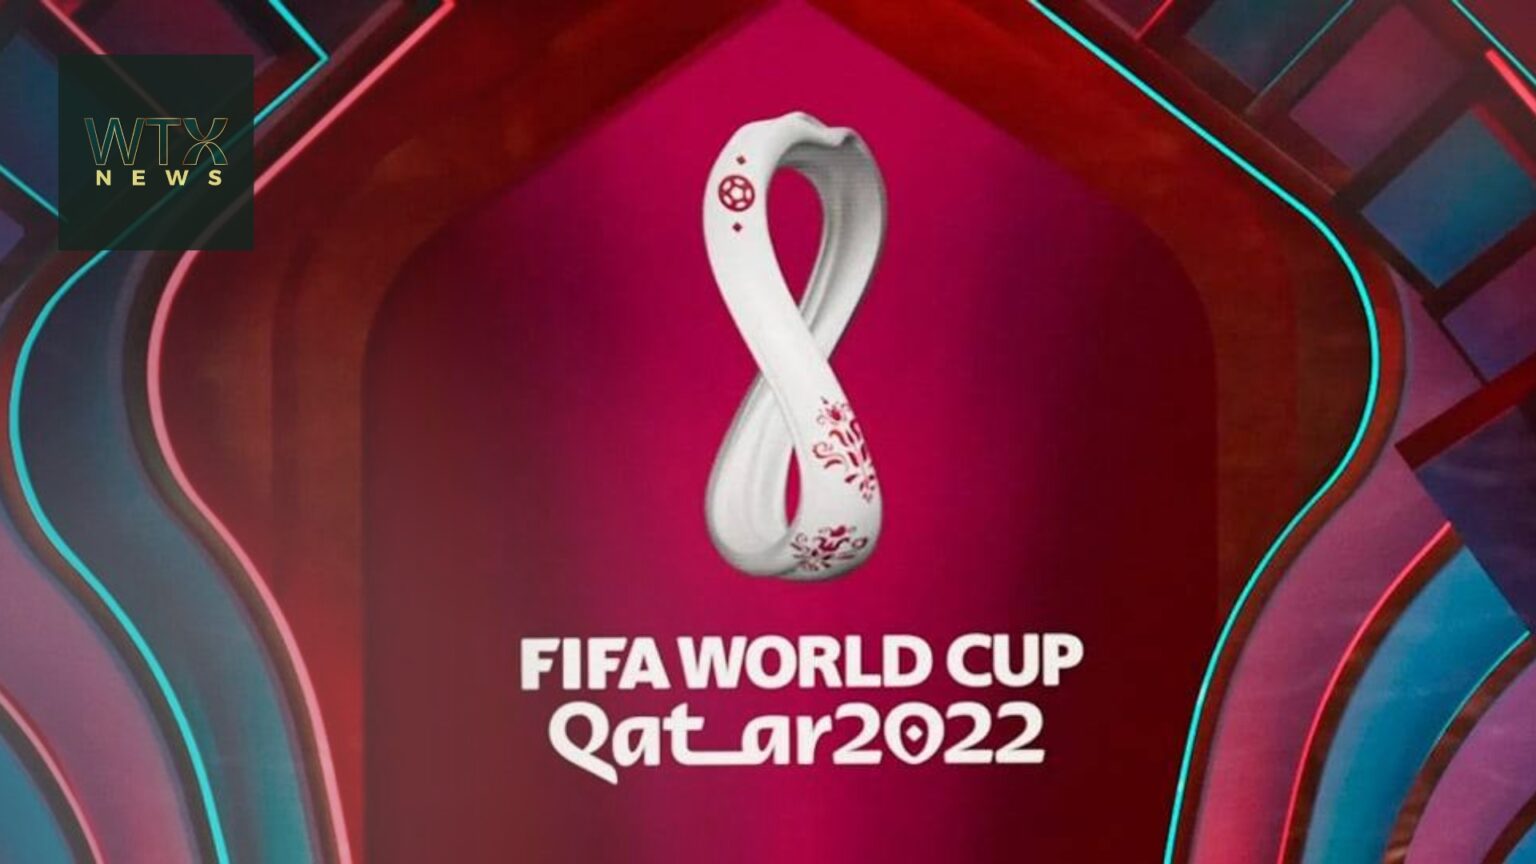 Qatar World Cup 2022 fixtures: Day 21